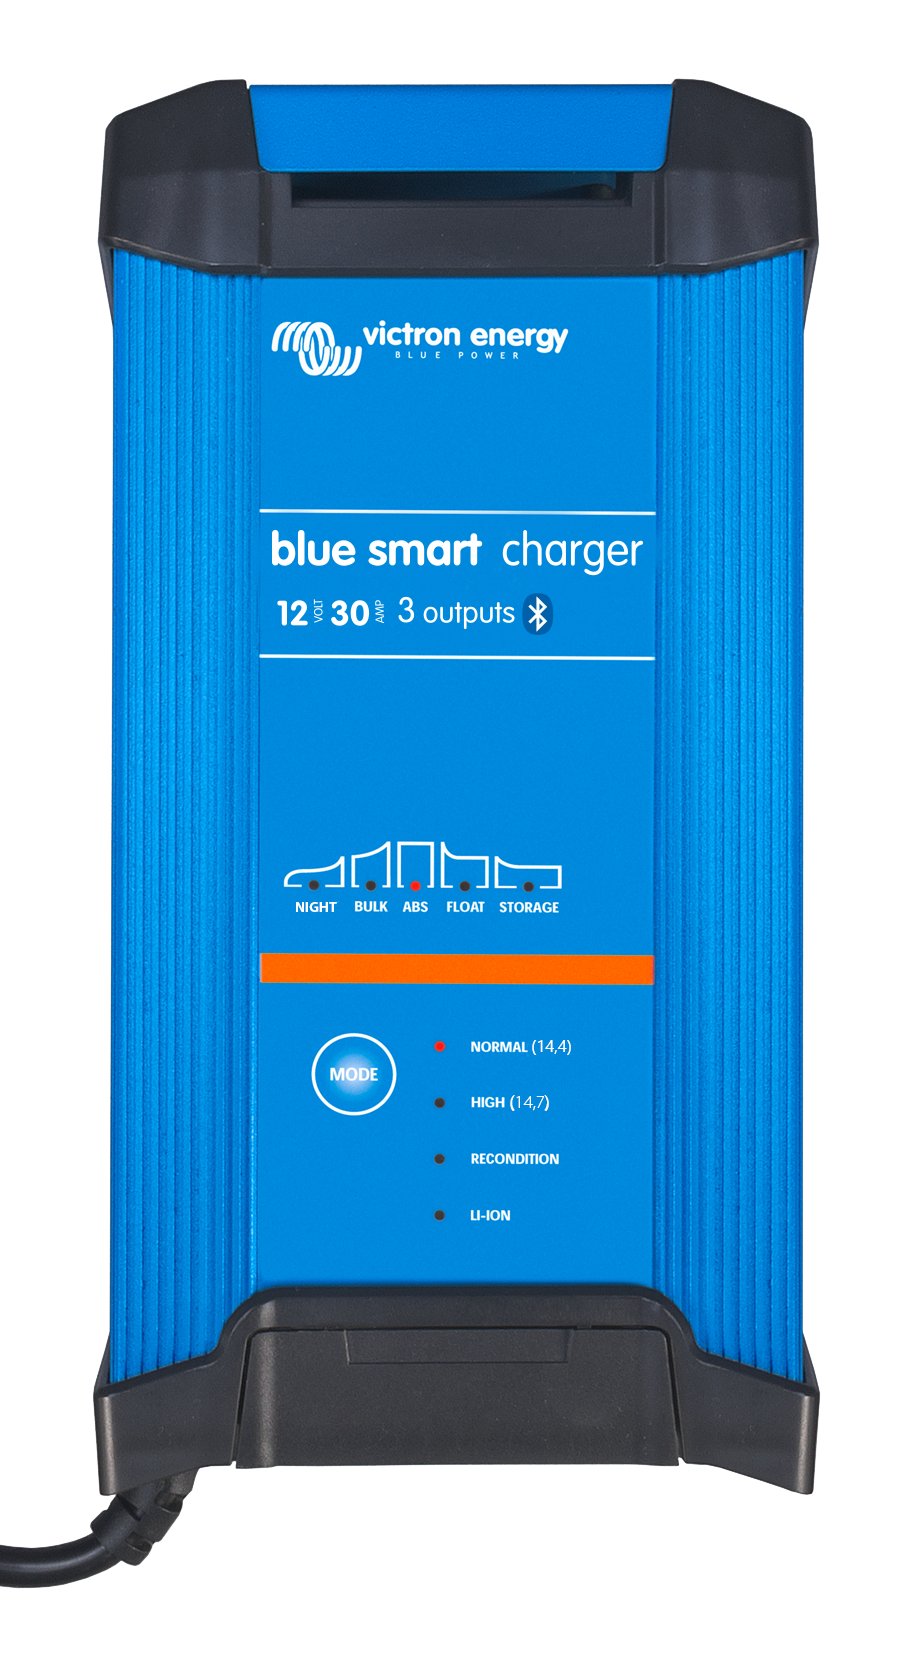 Can the batteries charged by the Victron Blue Smart IP22 Charger  be different chemistries? For example one lead acid and one lithium?